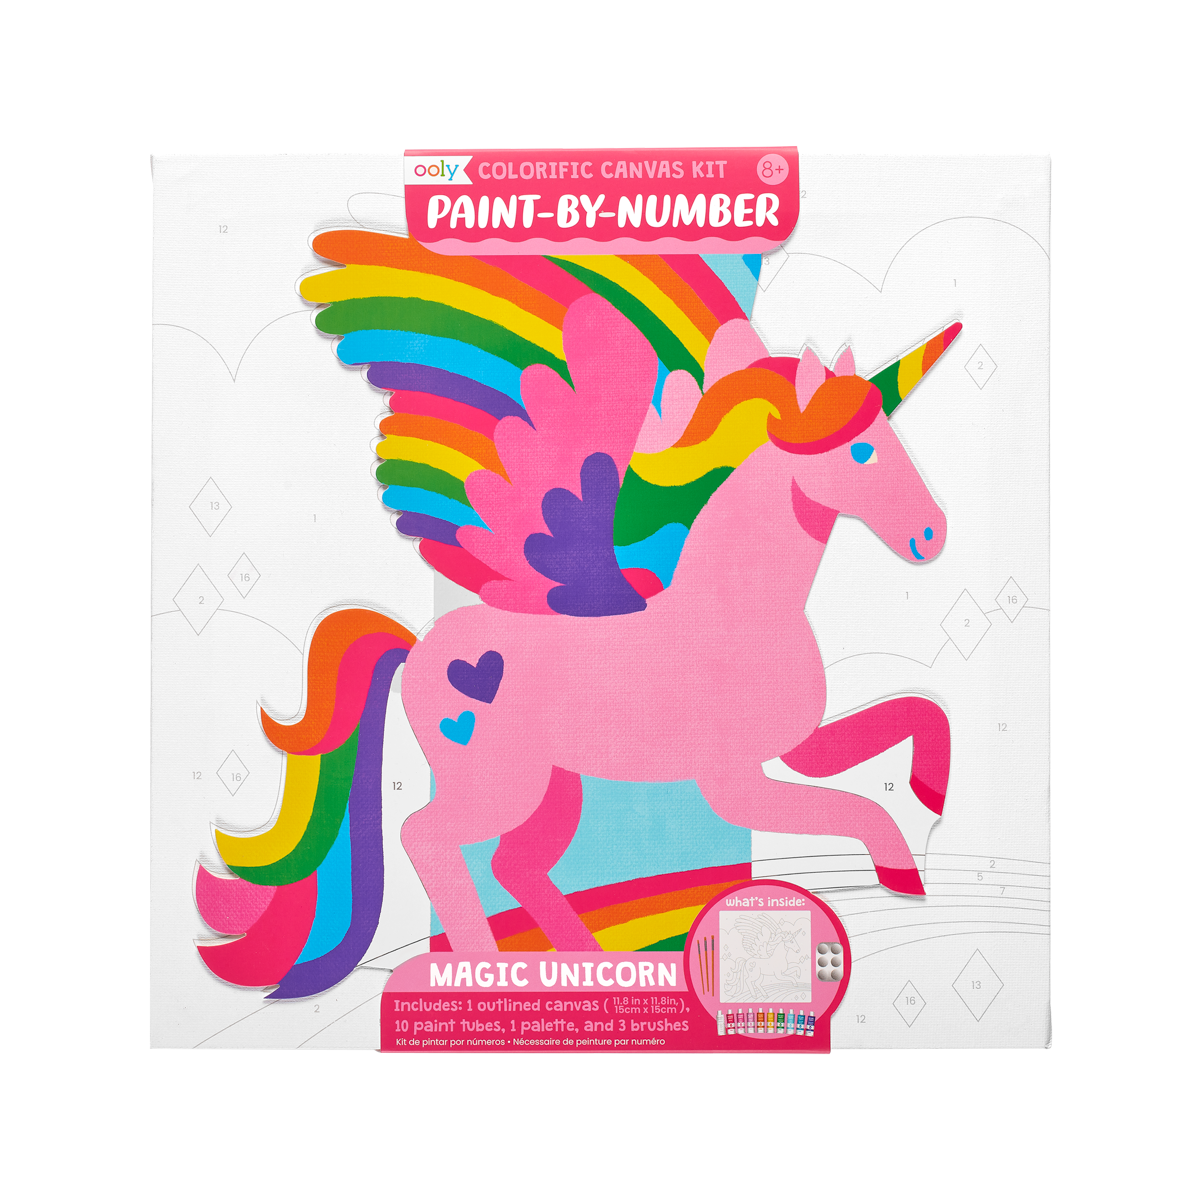 myPaintLab - Extra large paint by numbers themes on canvas